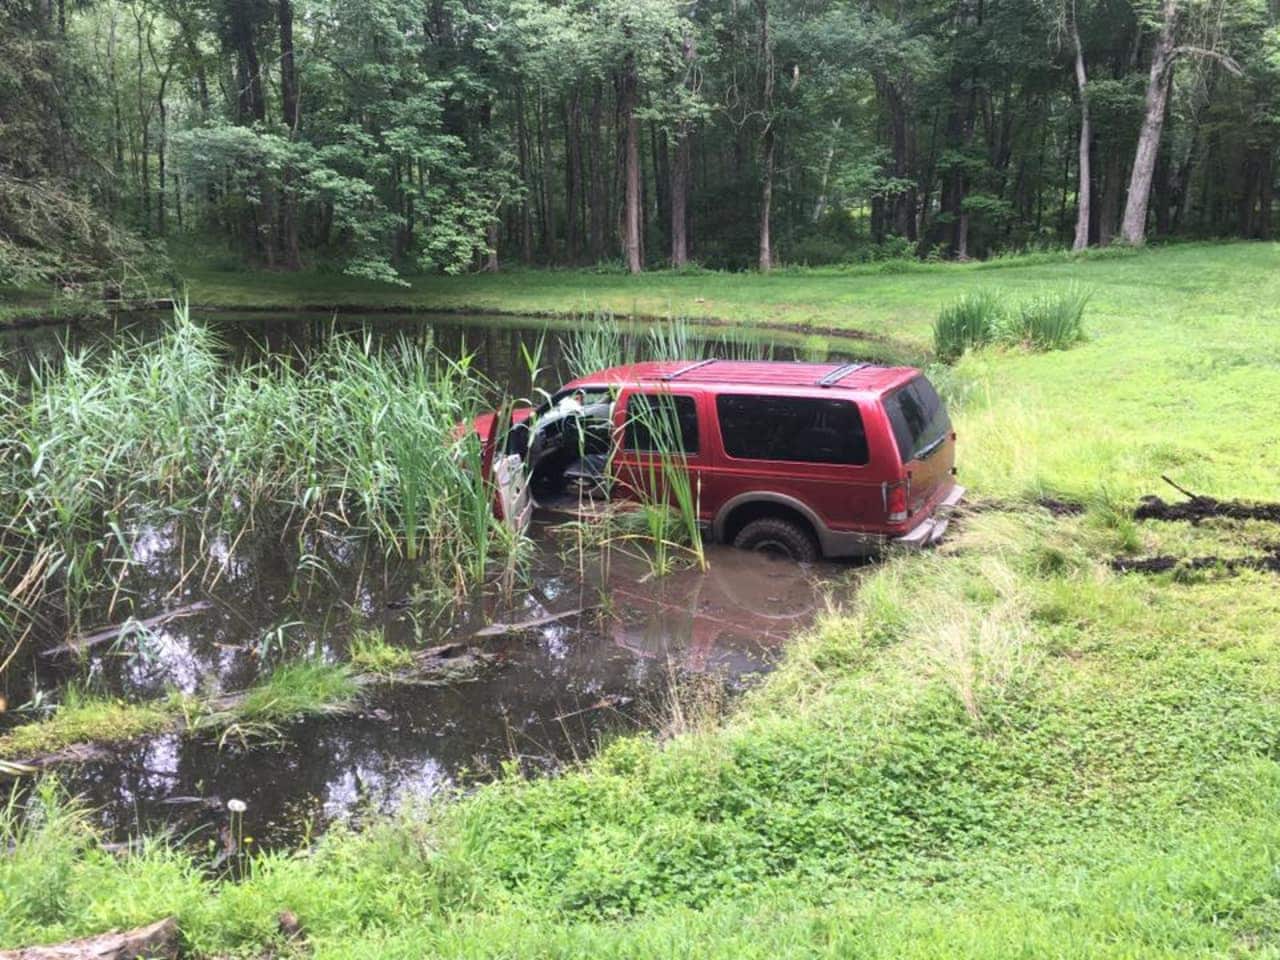 A look at the SUV submerged in the pond off Route 121 near the Ward Pound Ridge Reservation.